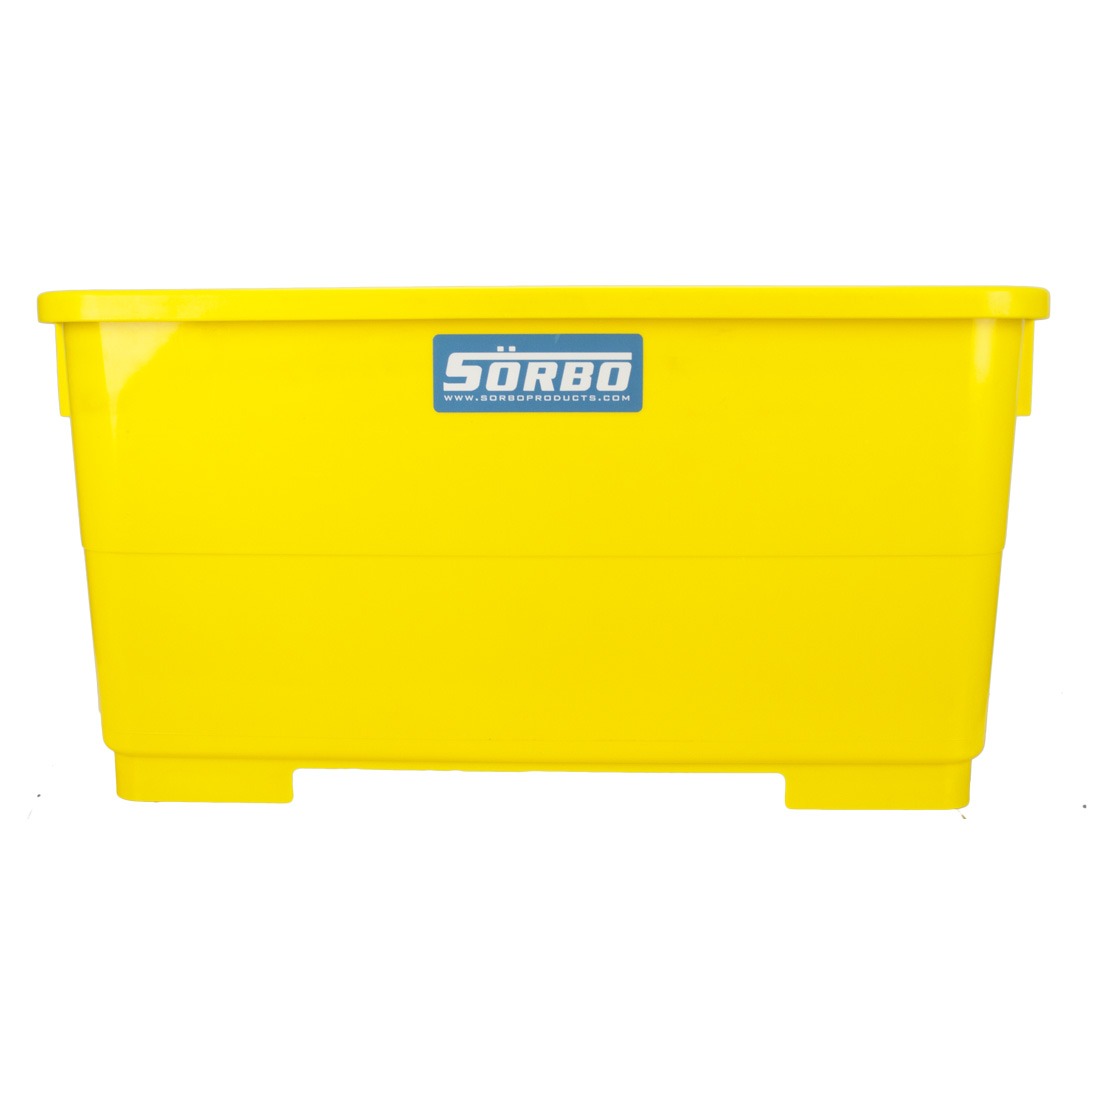 Sörbo Bucket with Clips for Squeegee and Washer for Leif Cart - 18 Inch - No Handle - Front View